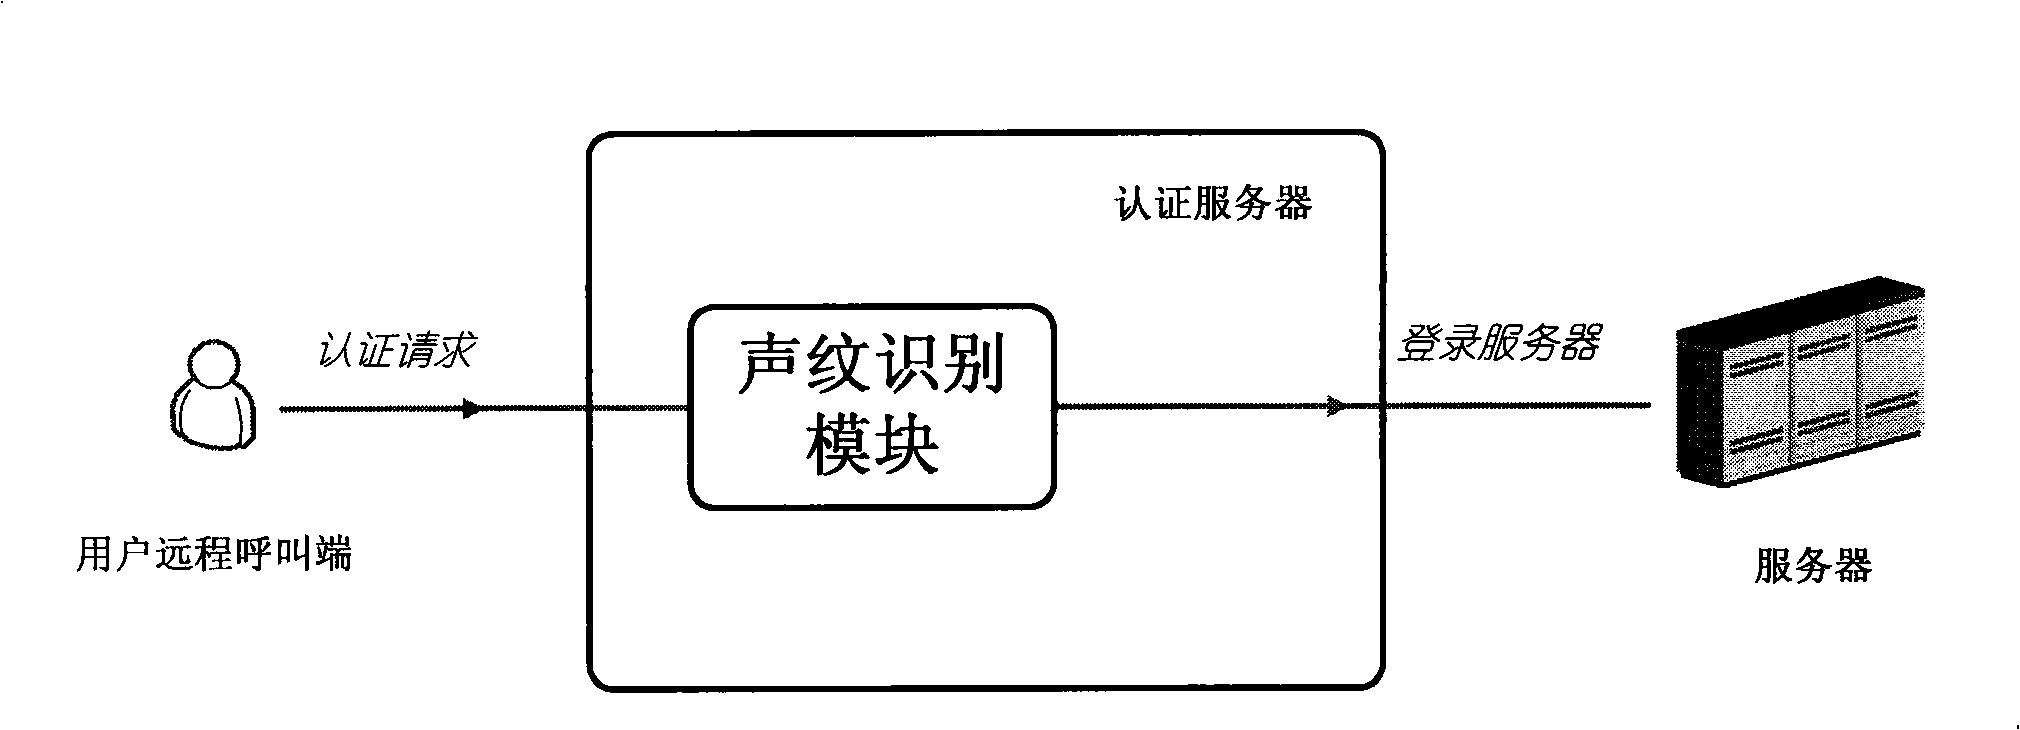 Remote voice identification authentication system and method